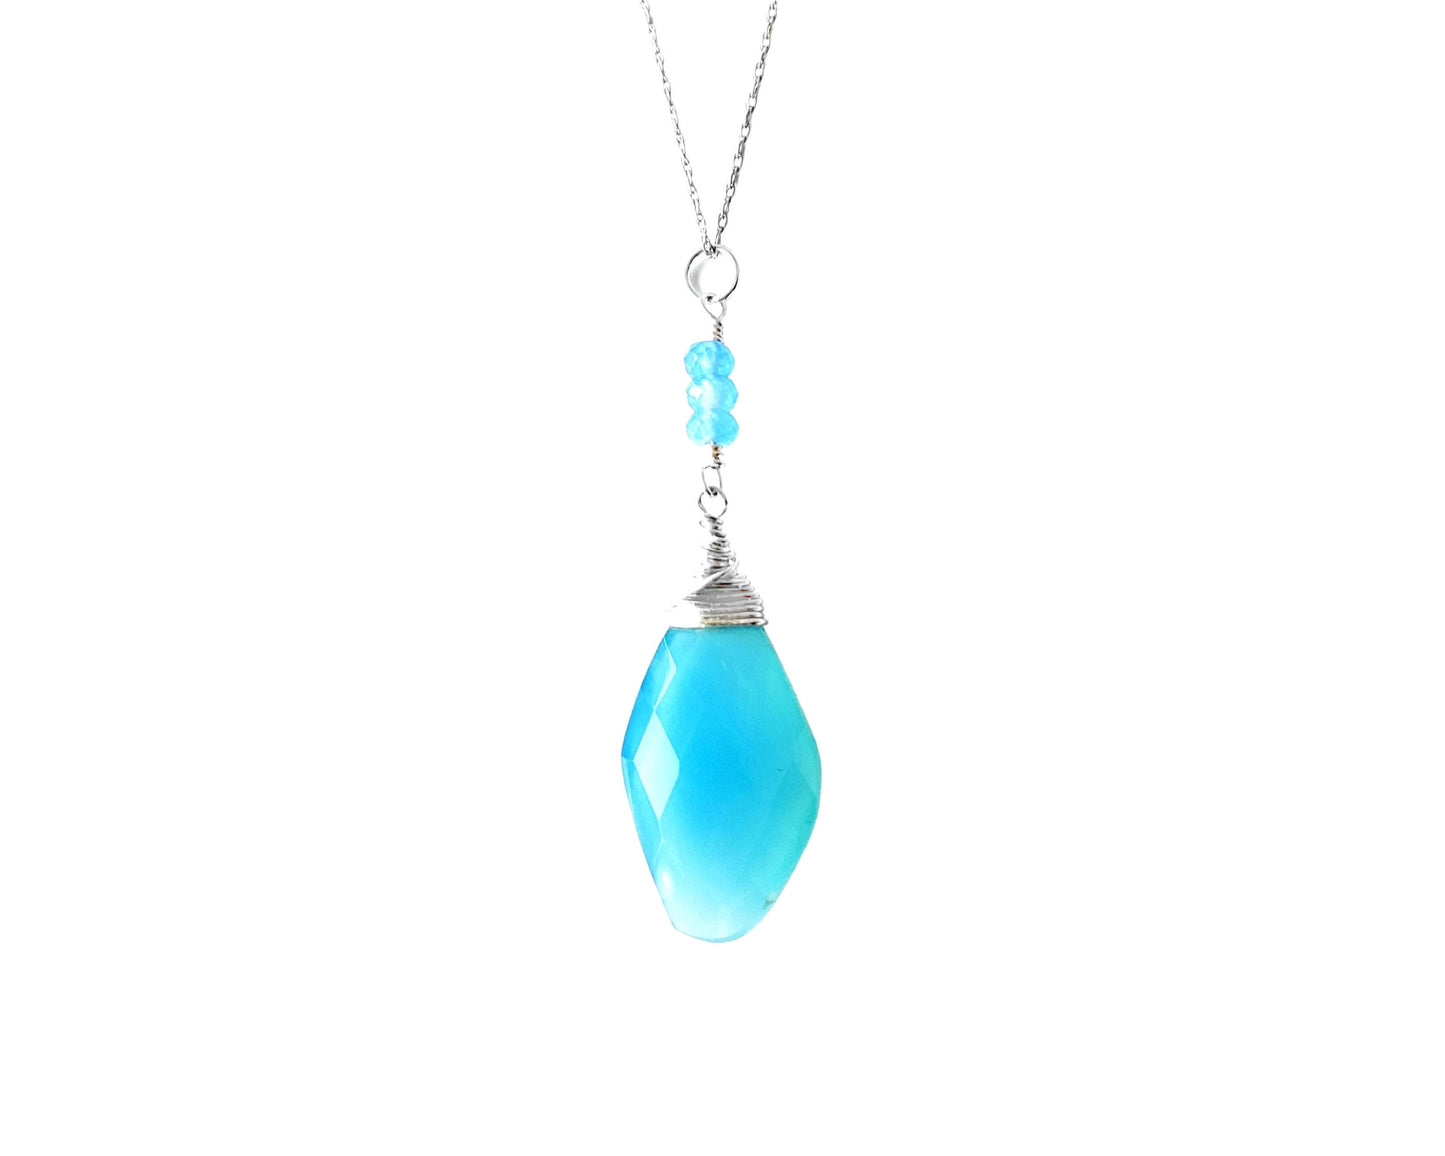 Art Deco Inspired Blue Chalcedony Jade Pendant made with Sterling Silver,  large blue Chalcedony stone decoratively wire wrapped to small blue Jade stones, dangle on a fine chain. 